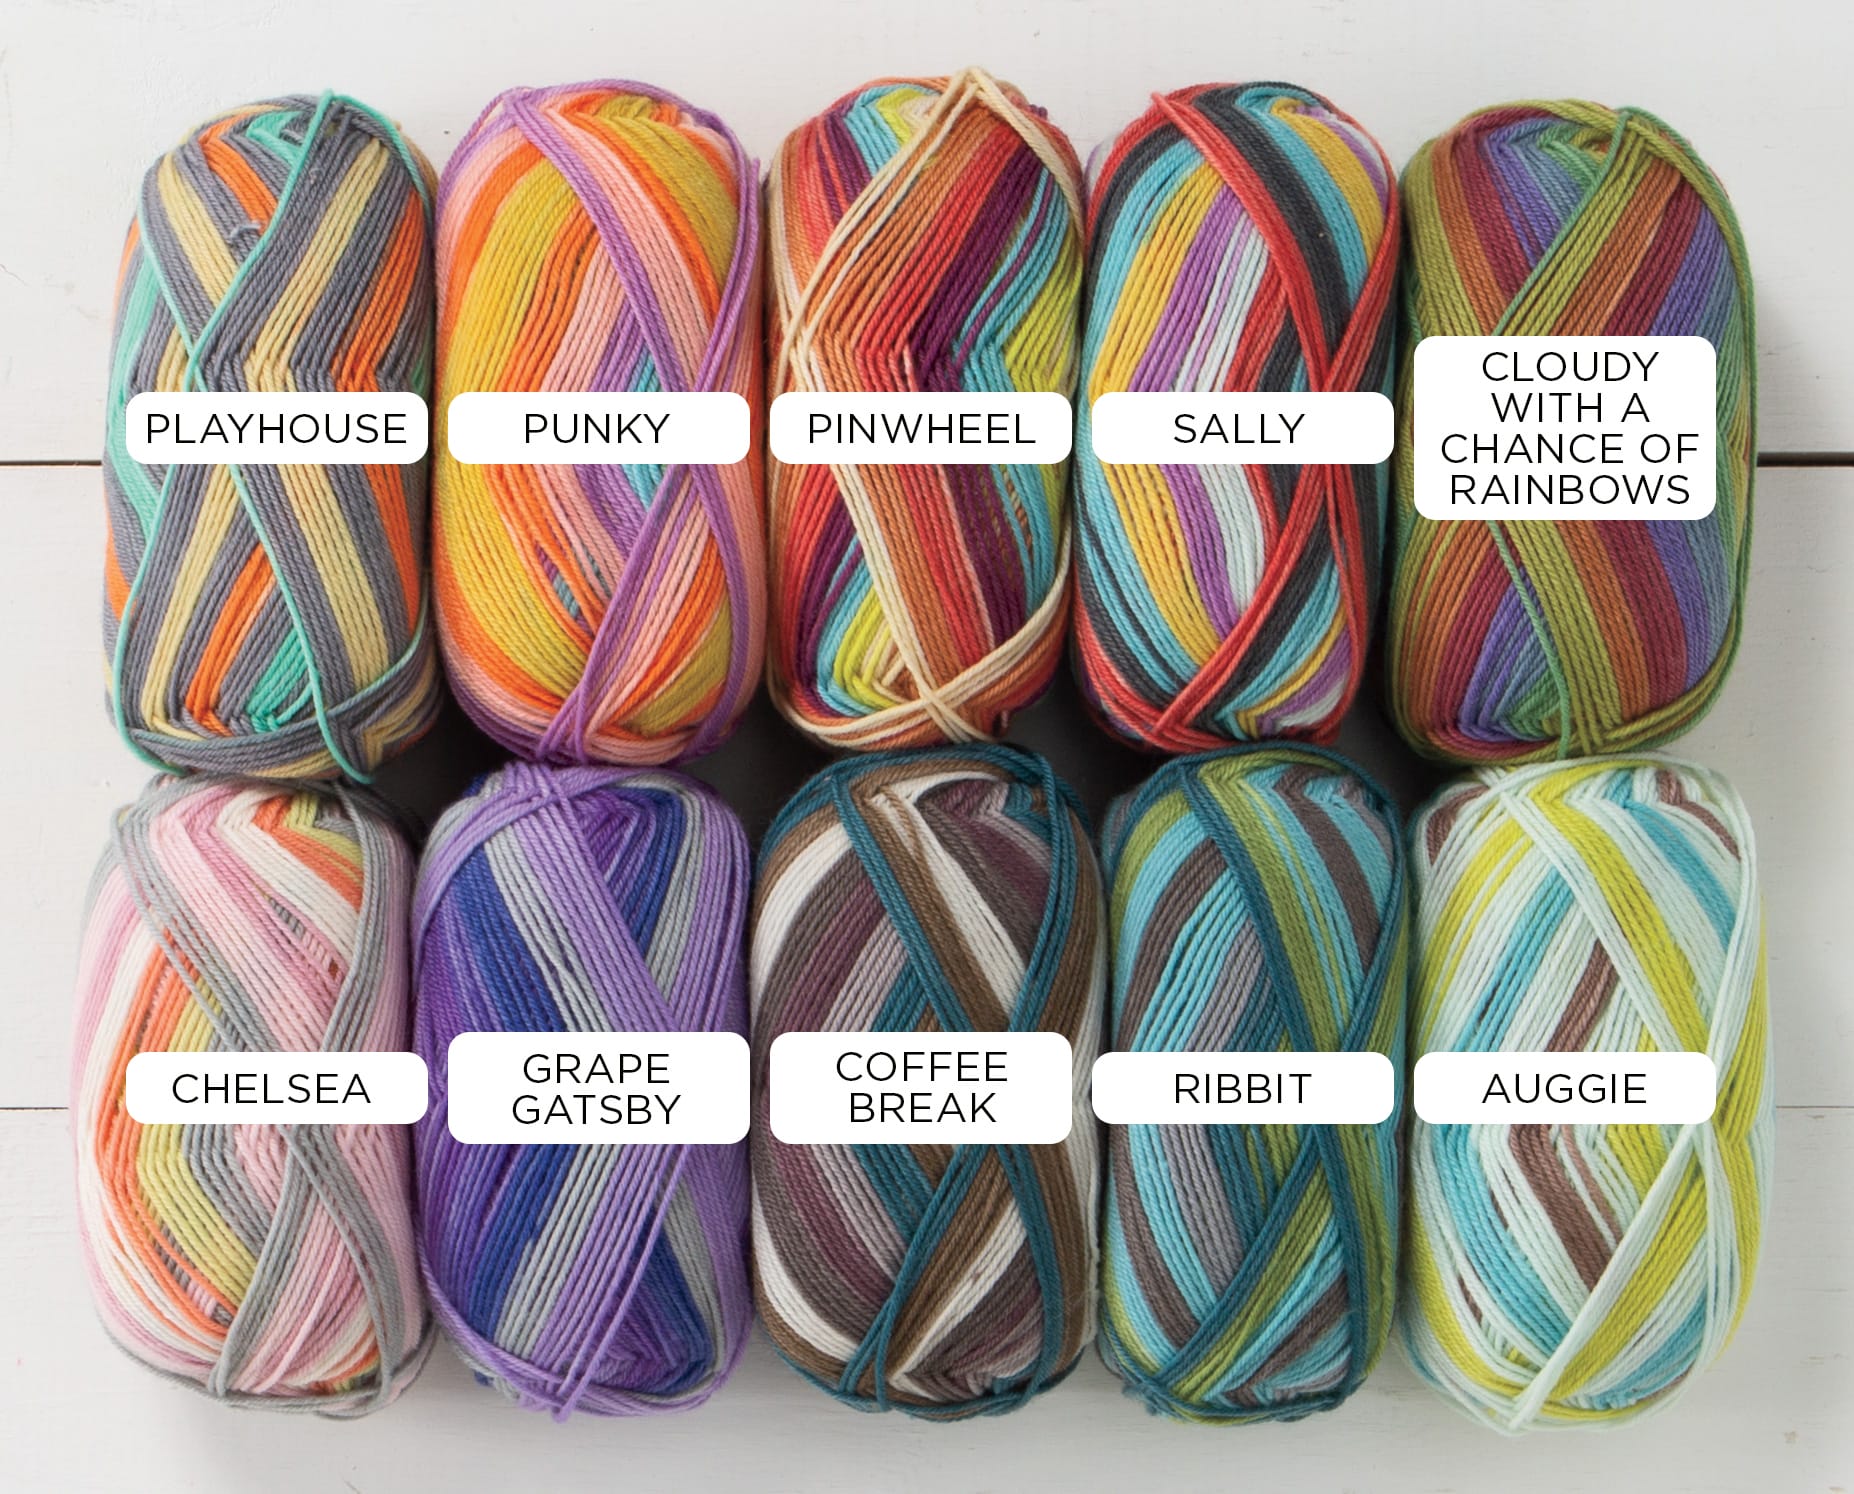 New Felici Colors for Summer! - The Knit Picks Staff Knitting Blog